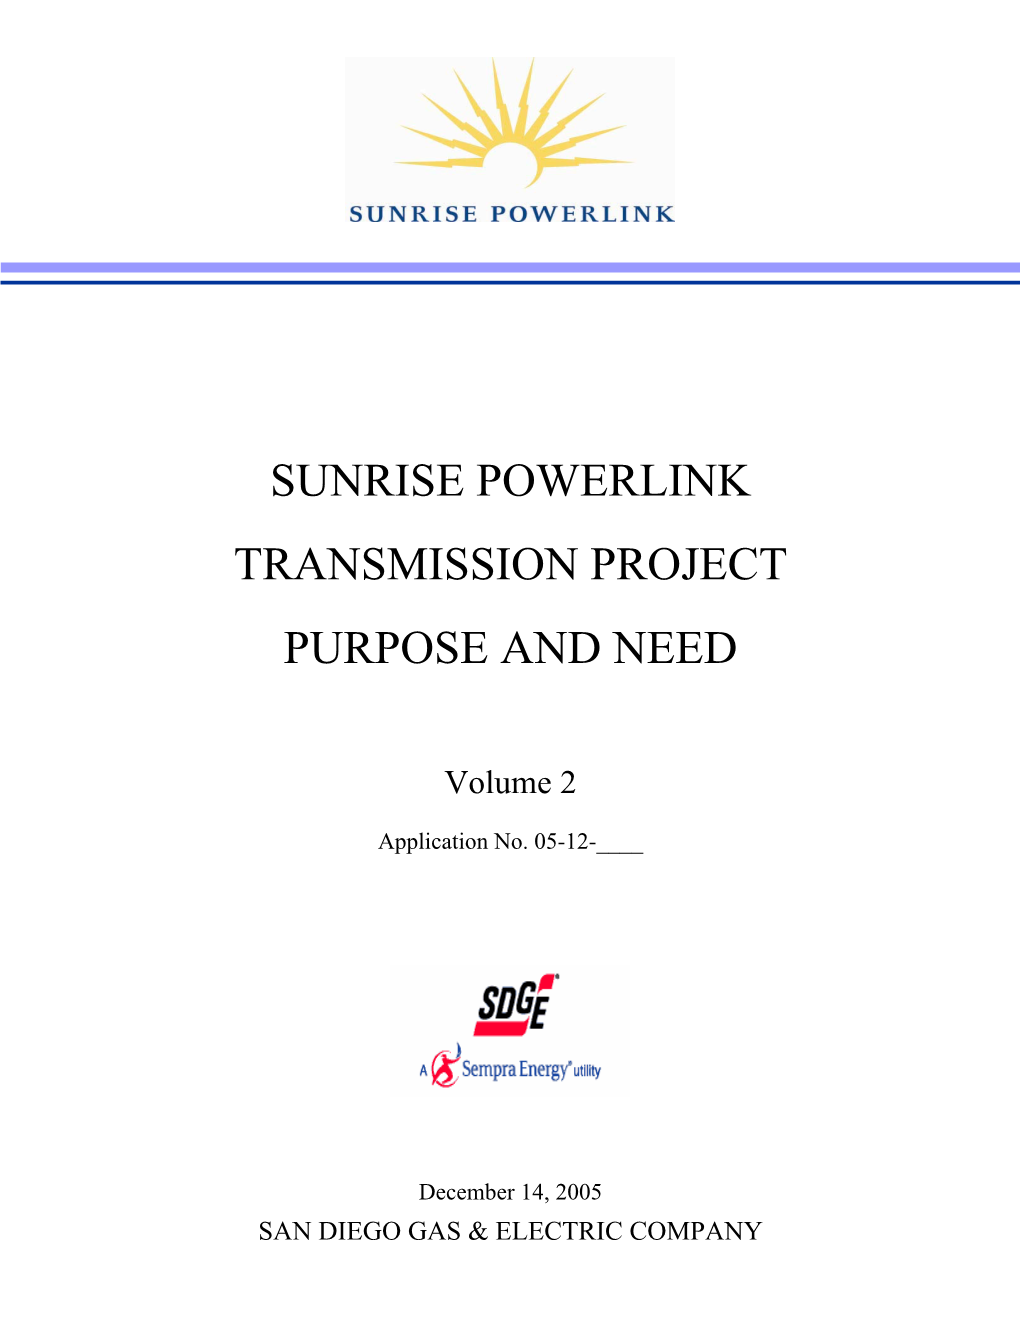 Sunrise Powerlink Transmission Project Purpose and Need